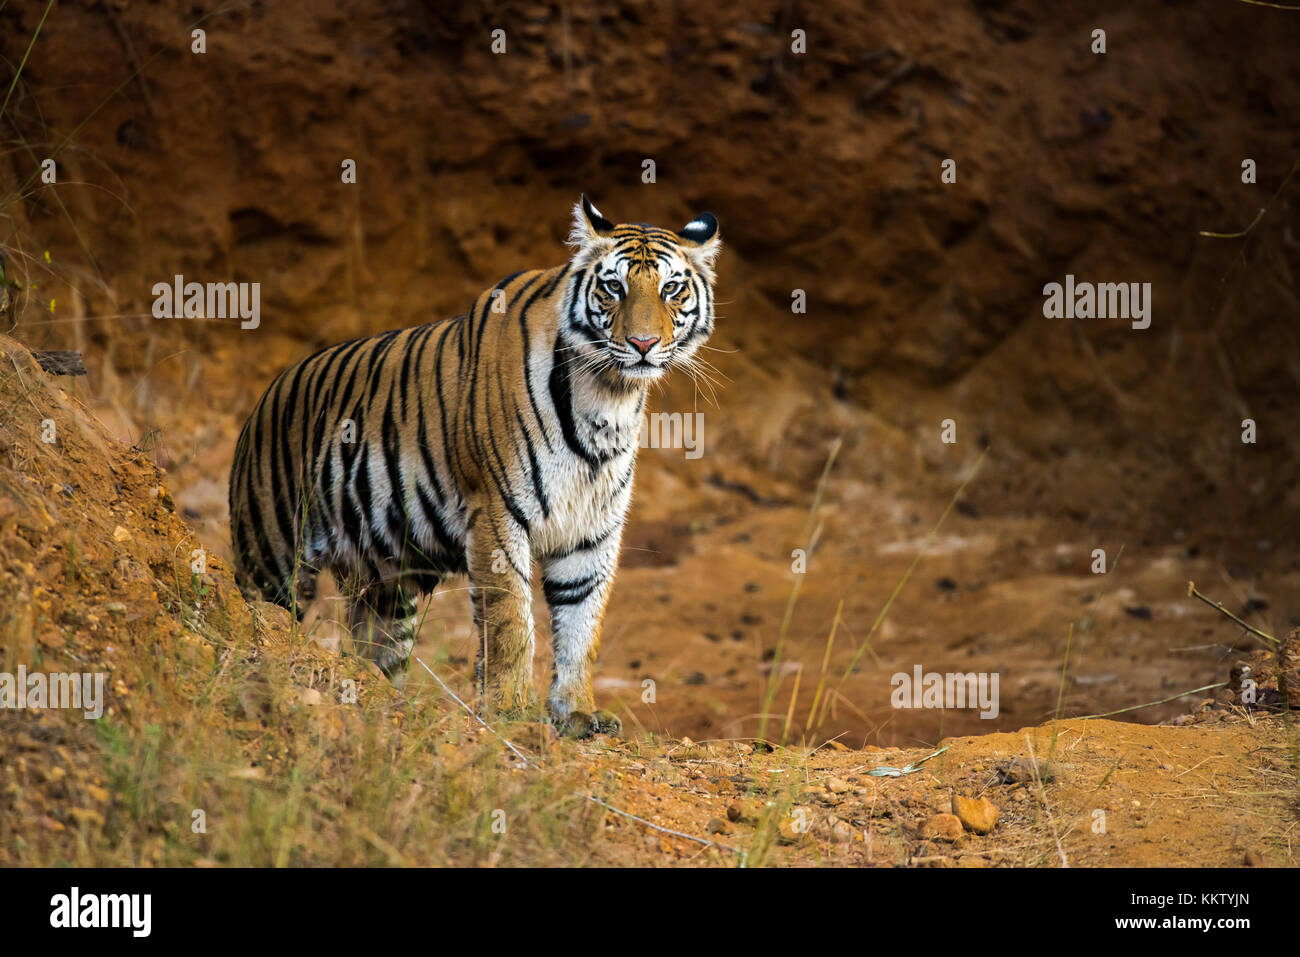 A Bengal Tiger from Bandhavgarh National Park, India Stock Photo